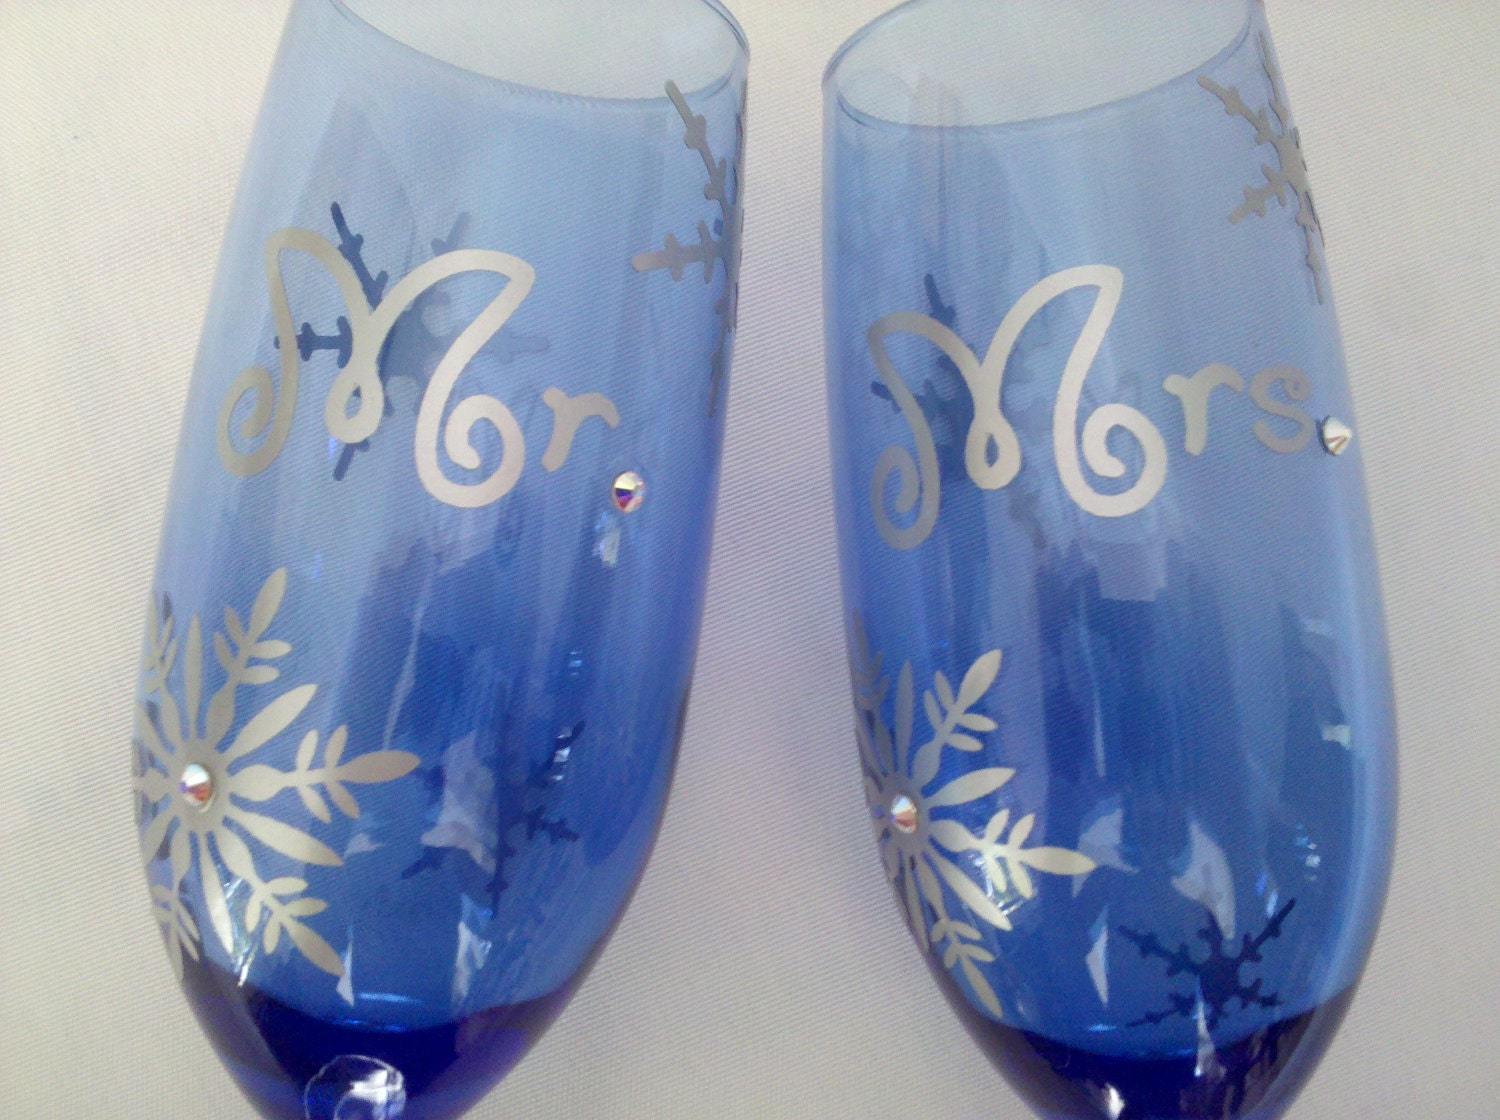 Mr. and Mrs. Christmas toasting flutes, unique champagne glasses for winter wedding.  Swarovski crystals and silver snowflakes